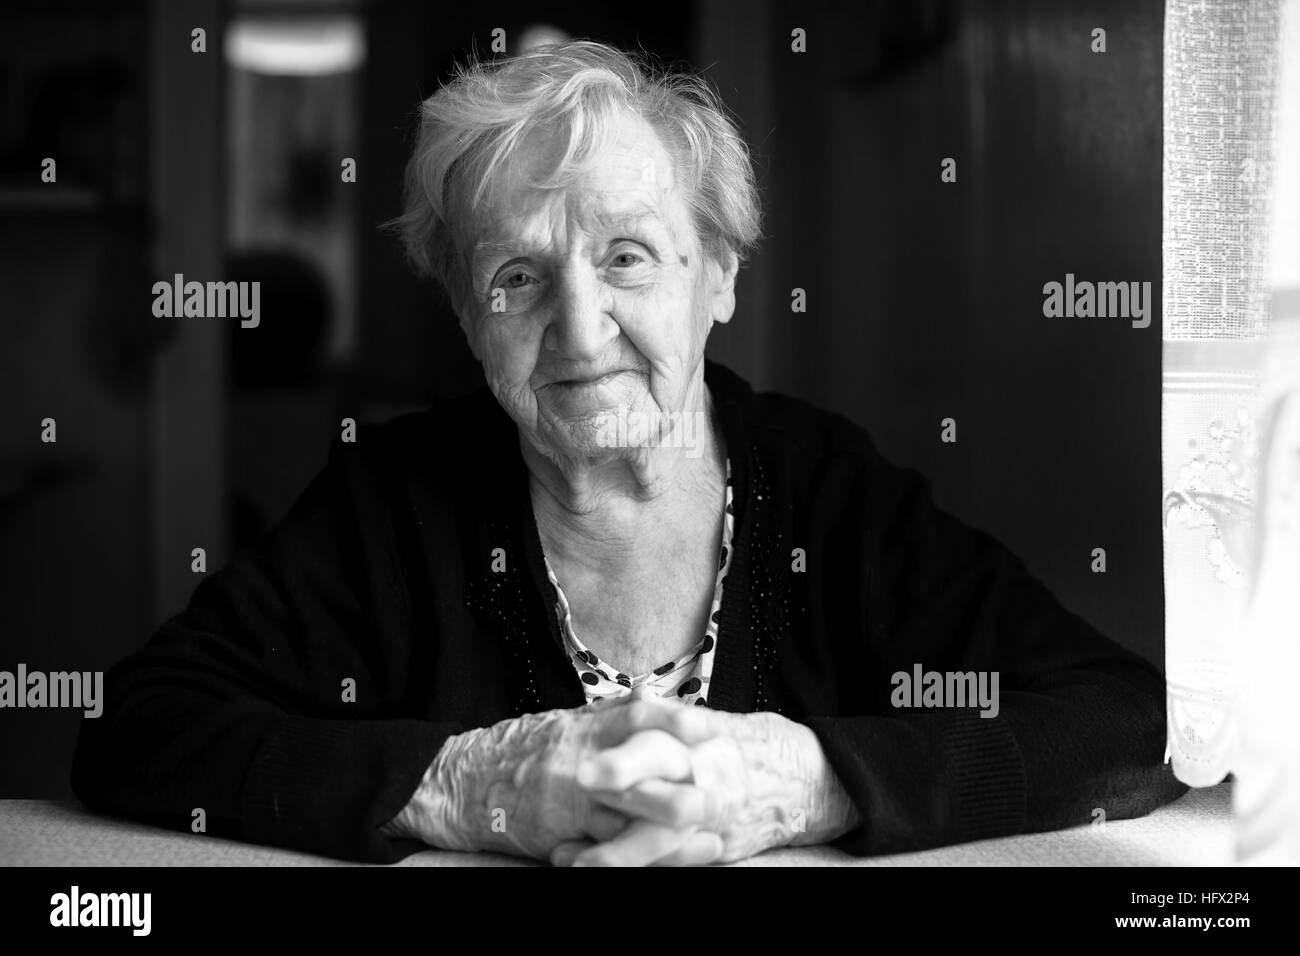 Old lady at window Black and White Stock Photos & Images - Alamy